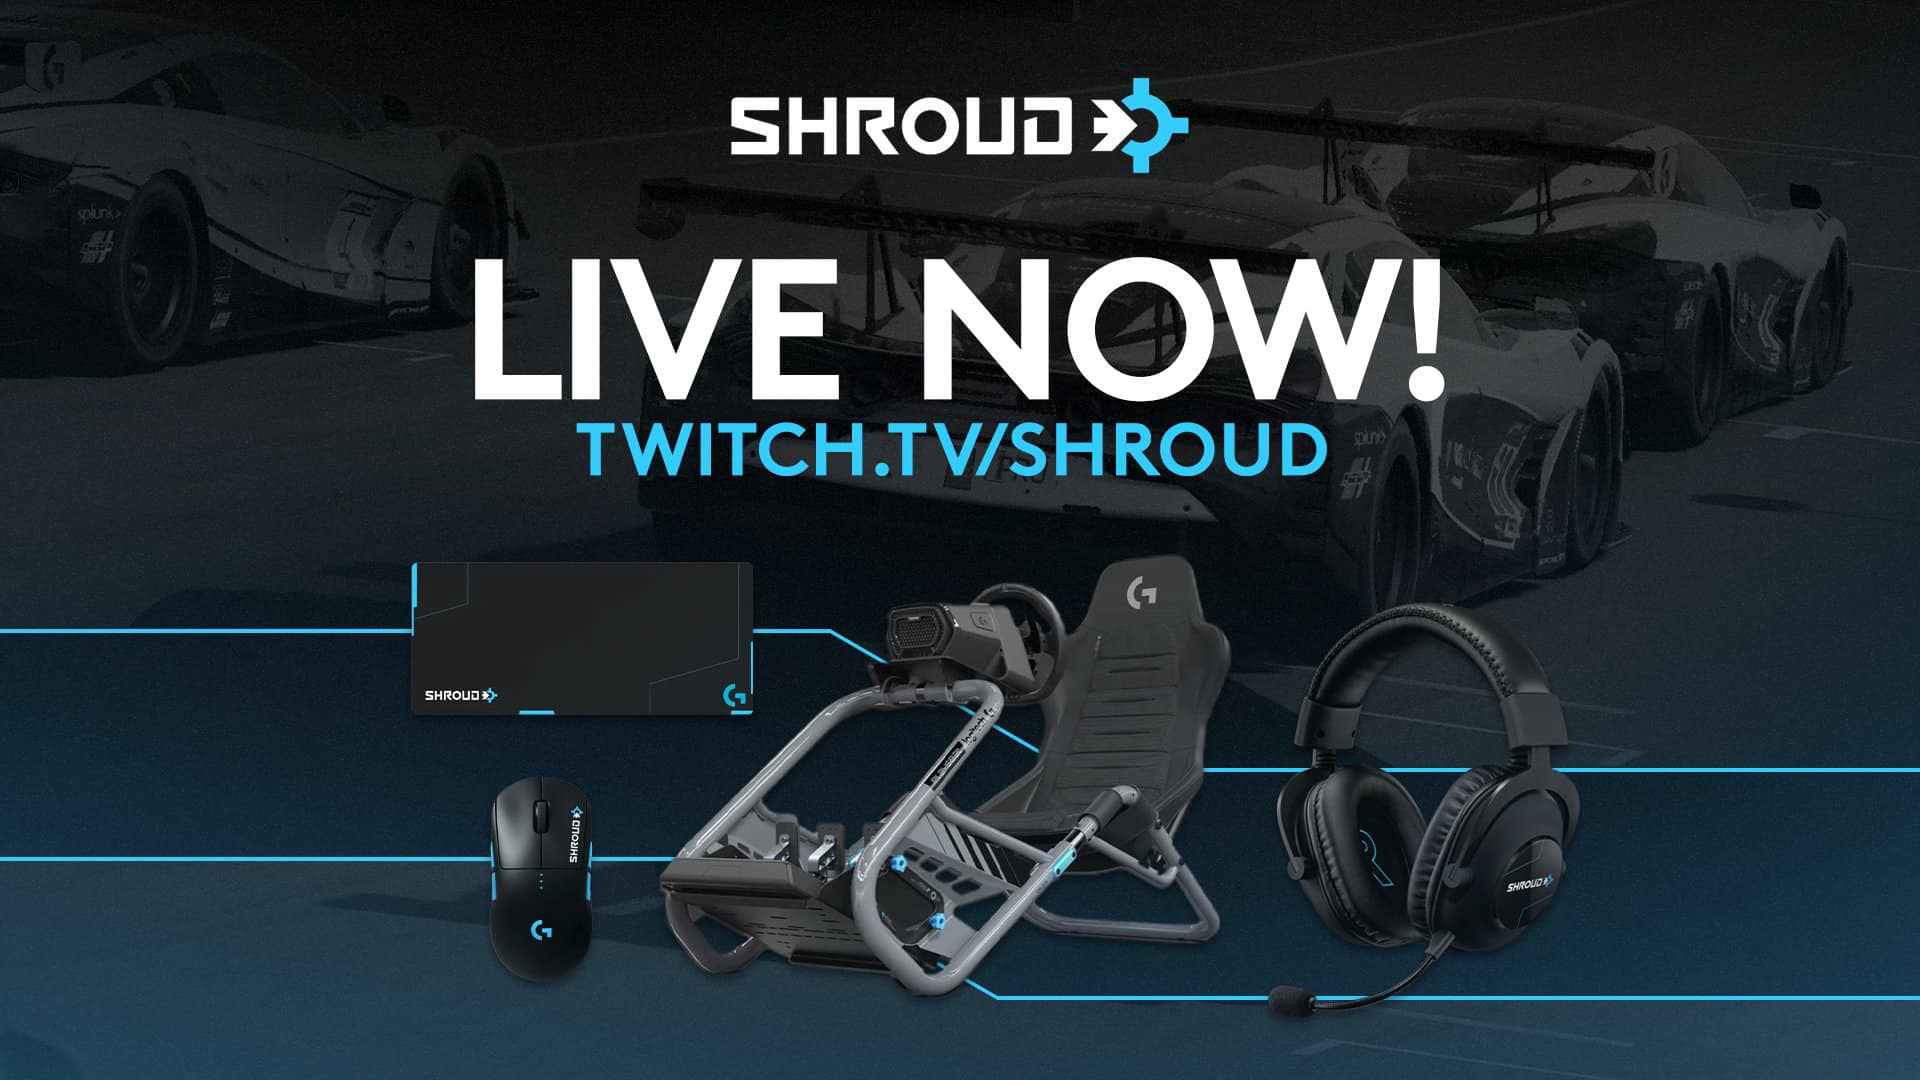 Assetto Corsa Competizione take on Shroud and win Logitech prizes Traxion